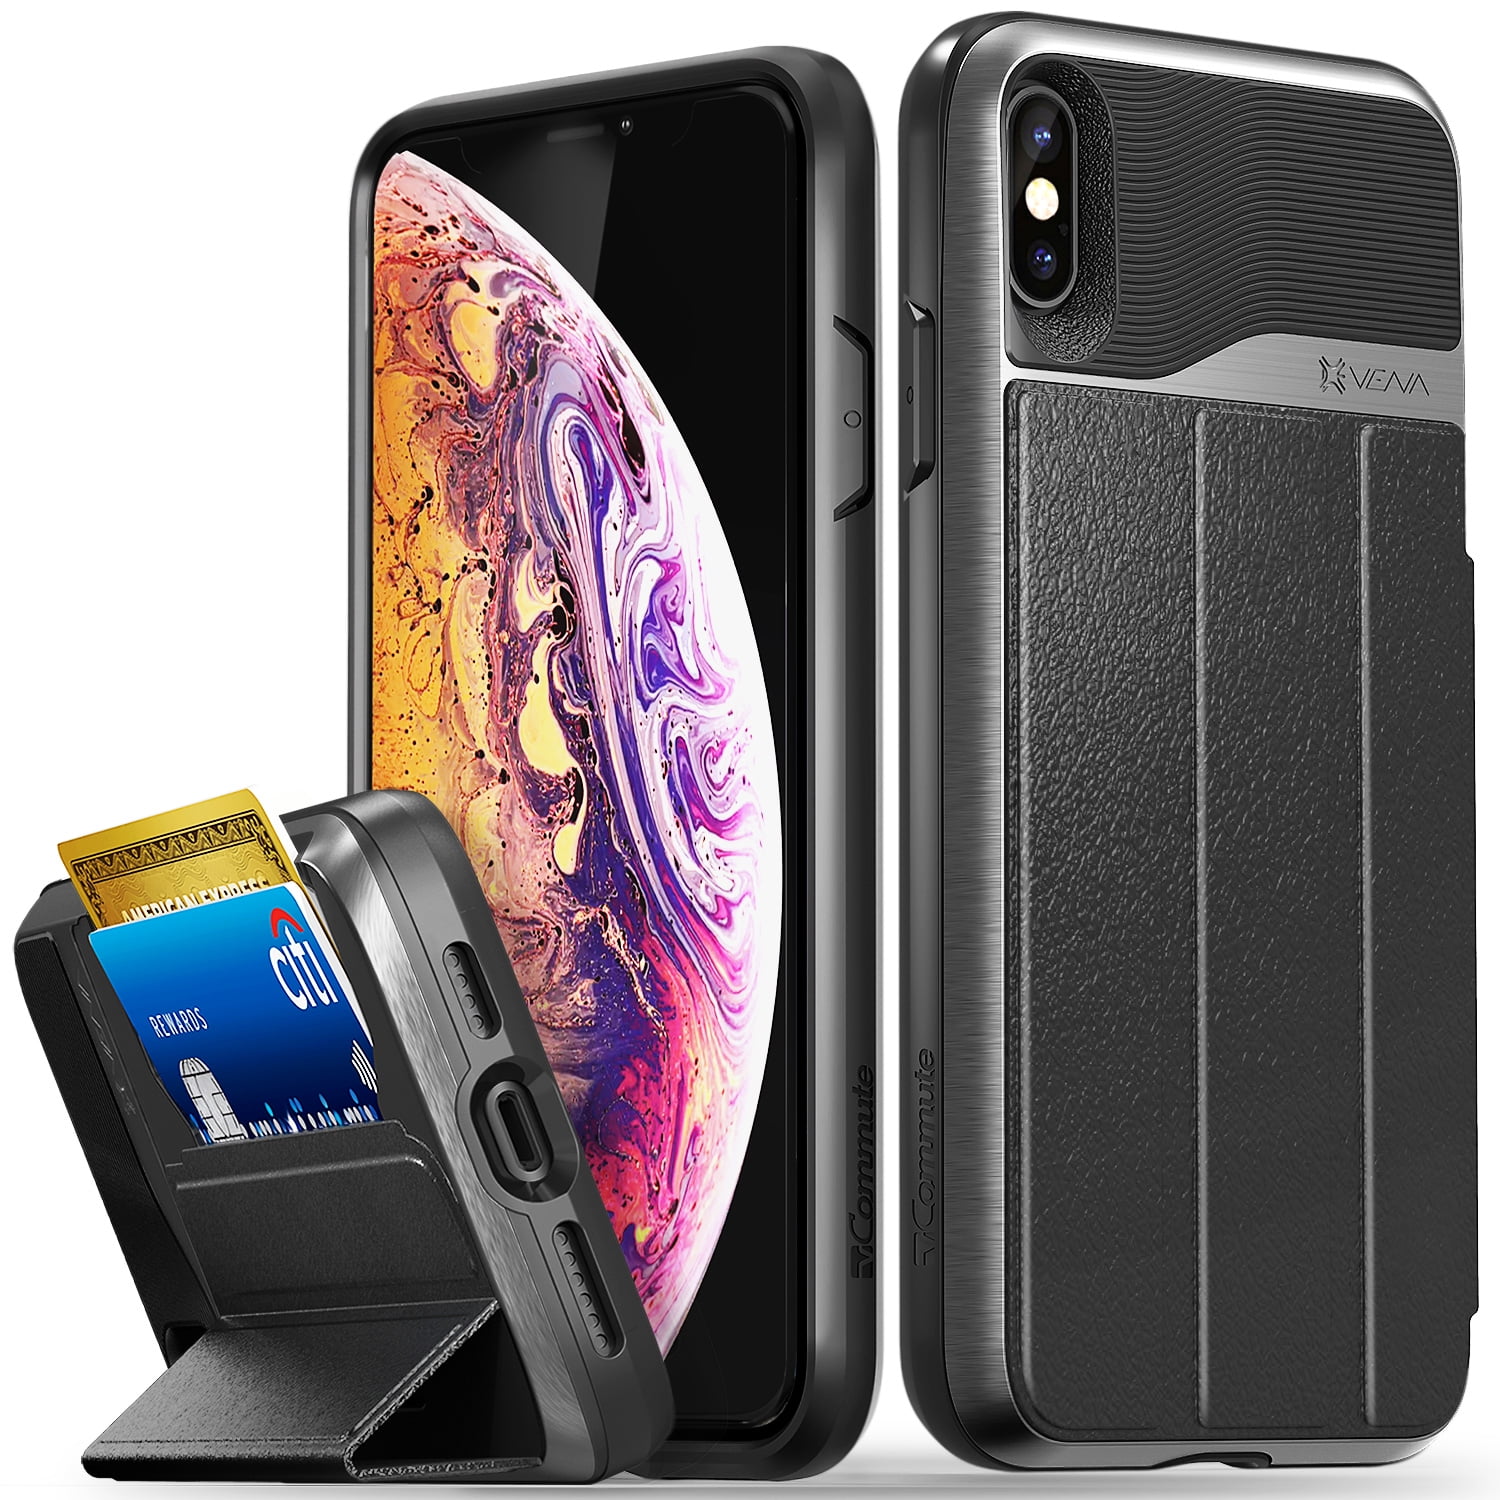 Leather Cover Business Gifts Wallet with Extra Waterproof Underwater Case Flip Case for iPhone Xs